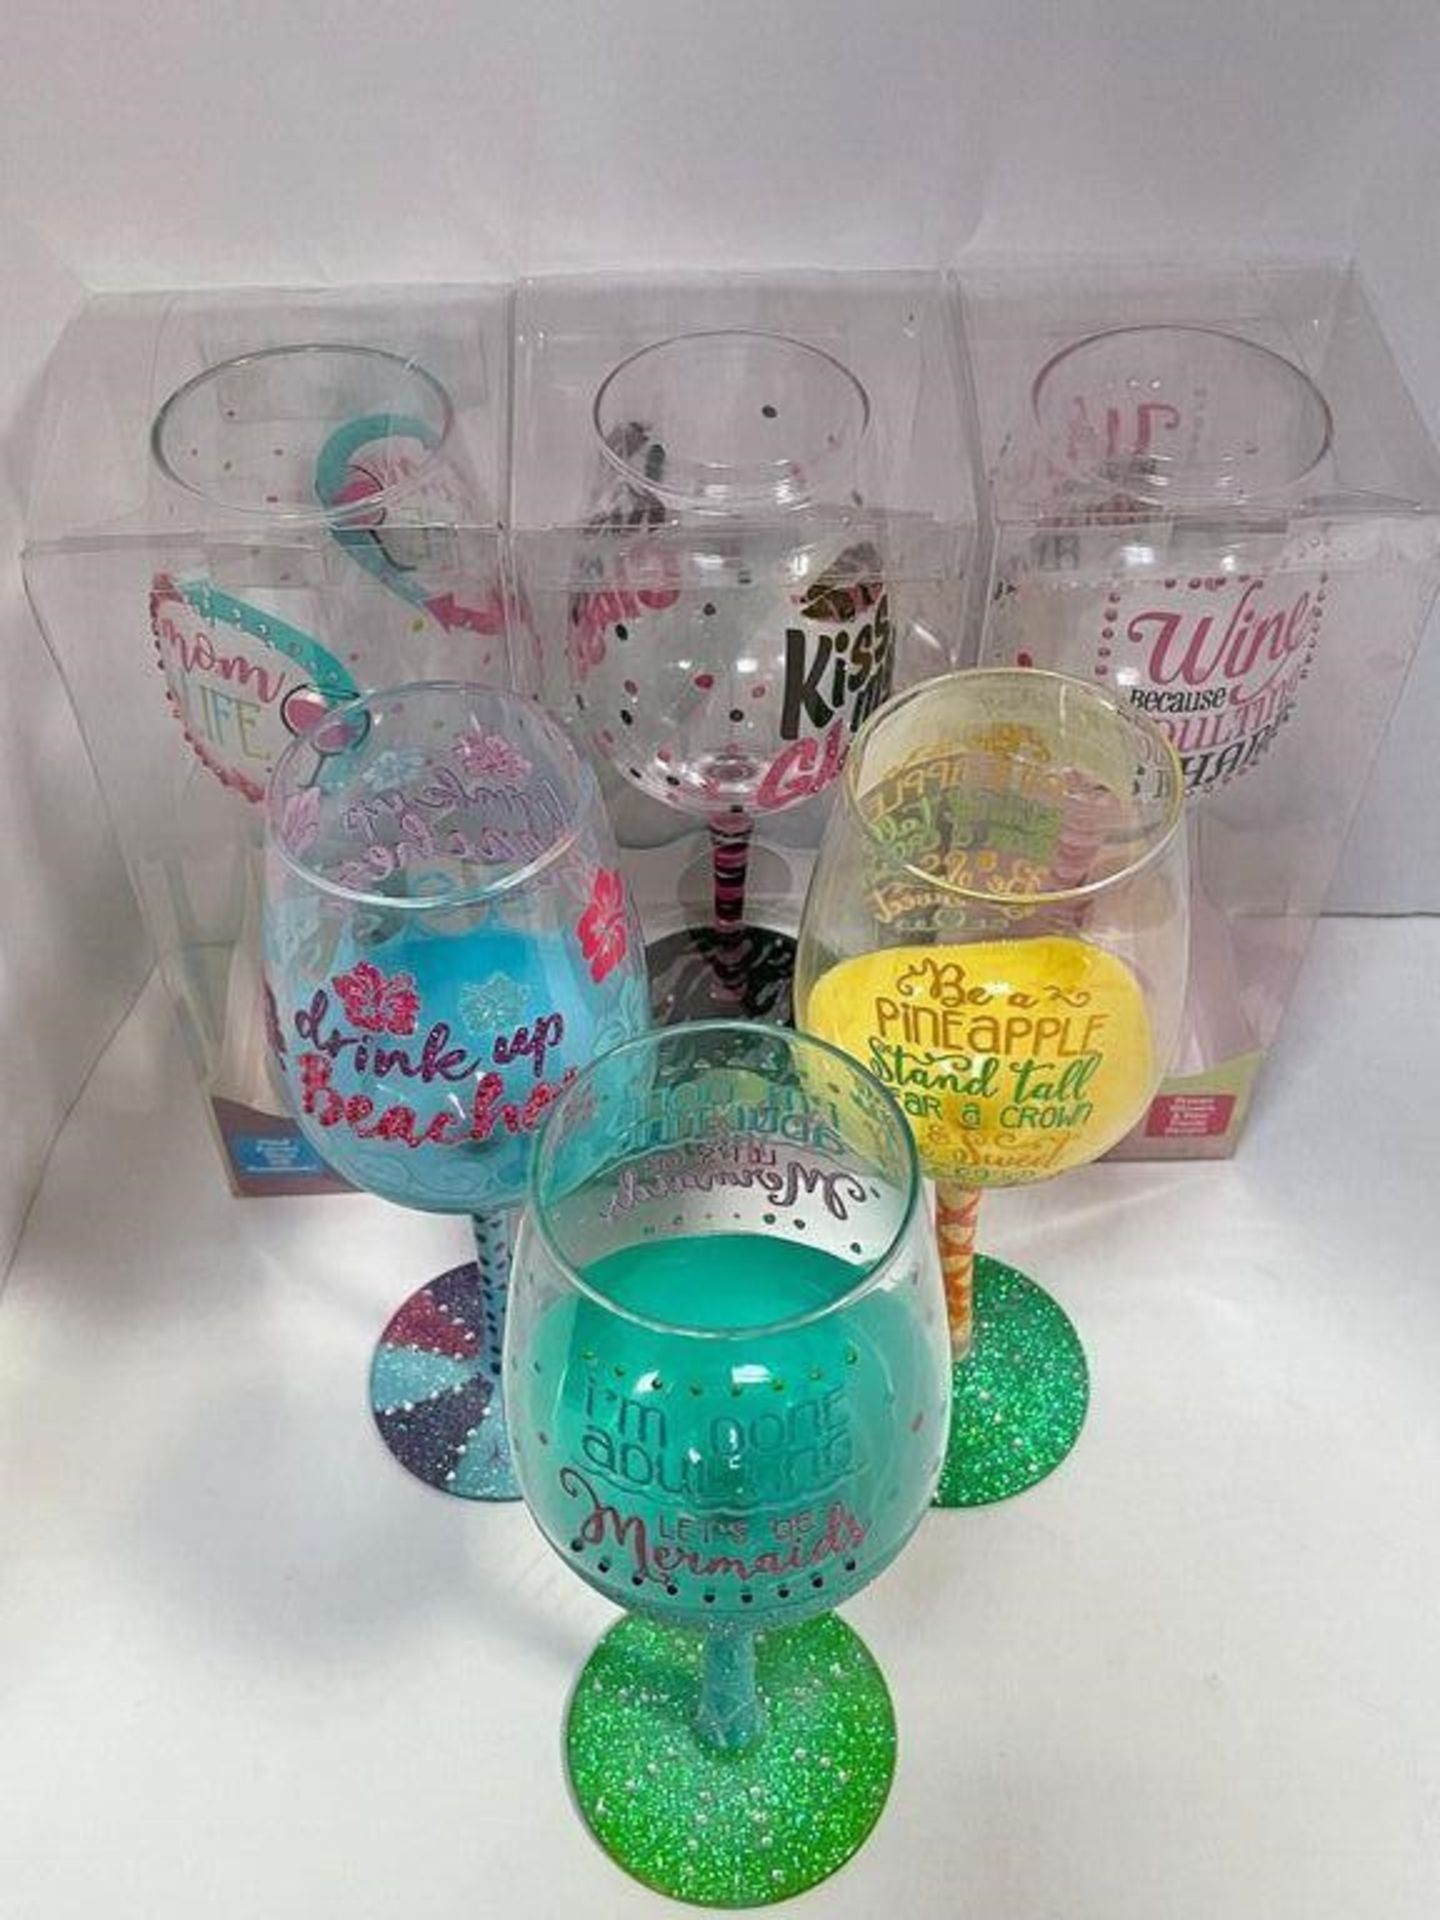 6 X DECORATED WINE GLASSES WITH FUN SAYINGS/PHRASES, VAROUS SAYINGS AND DESIGNS - Image 3 of 5